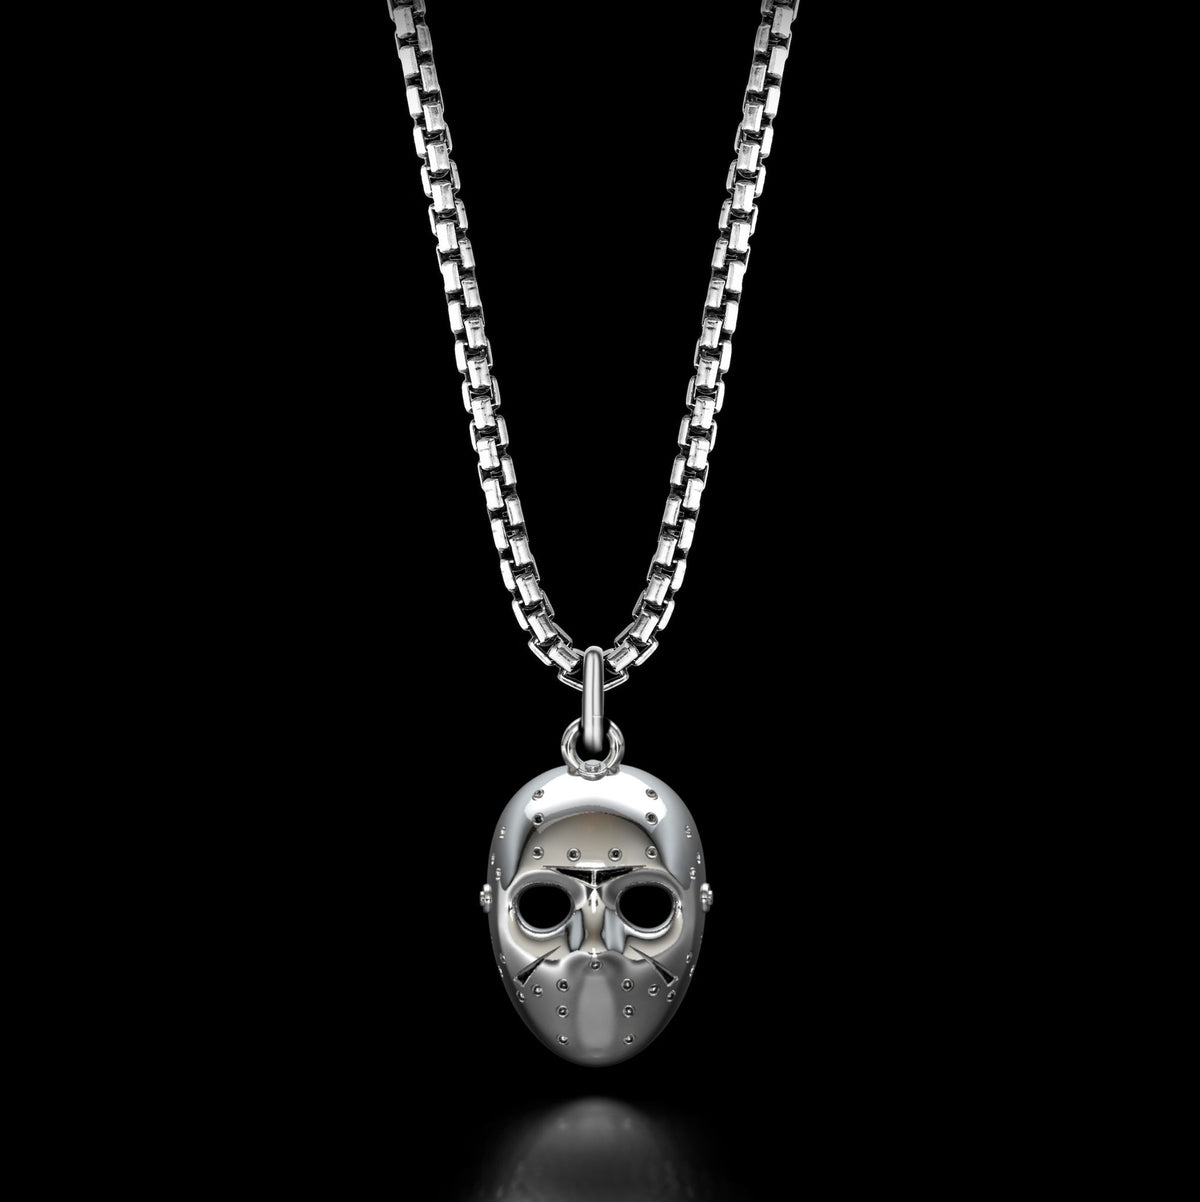 FRIDAY THE 13TH LIMITED EDITION NECKLACE